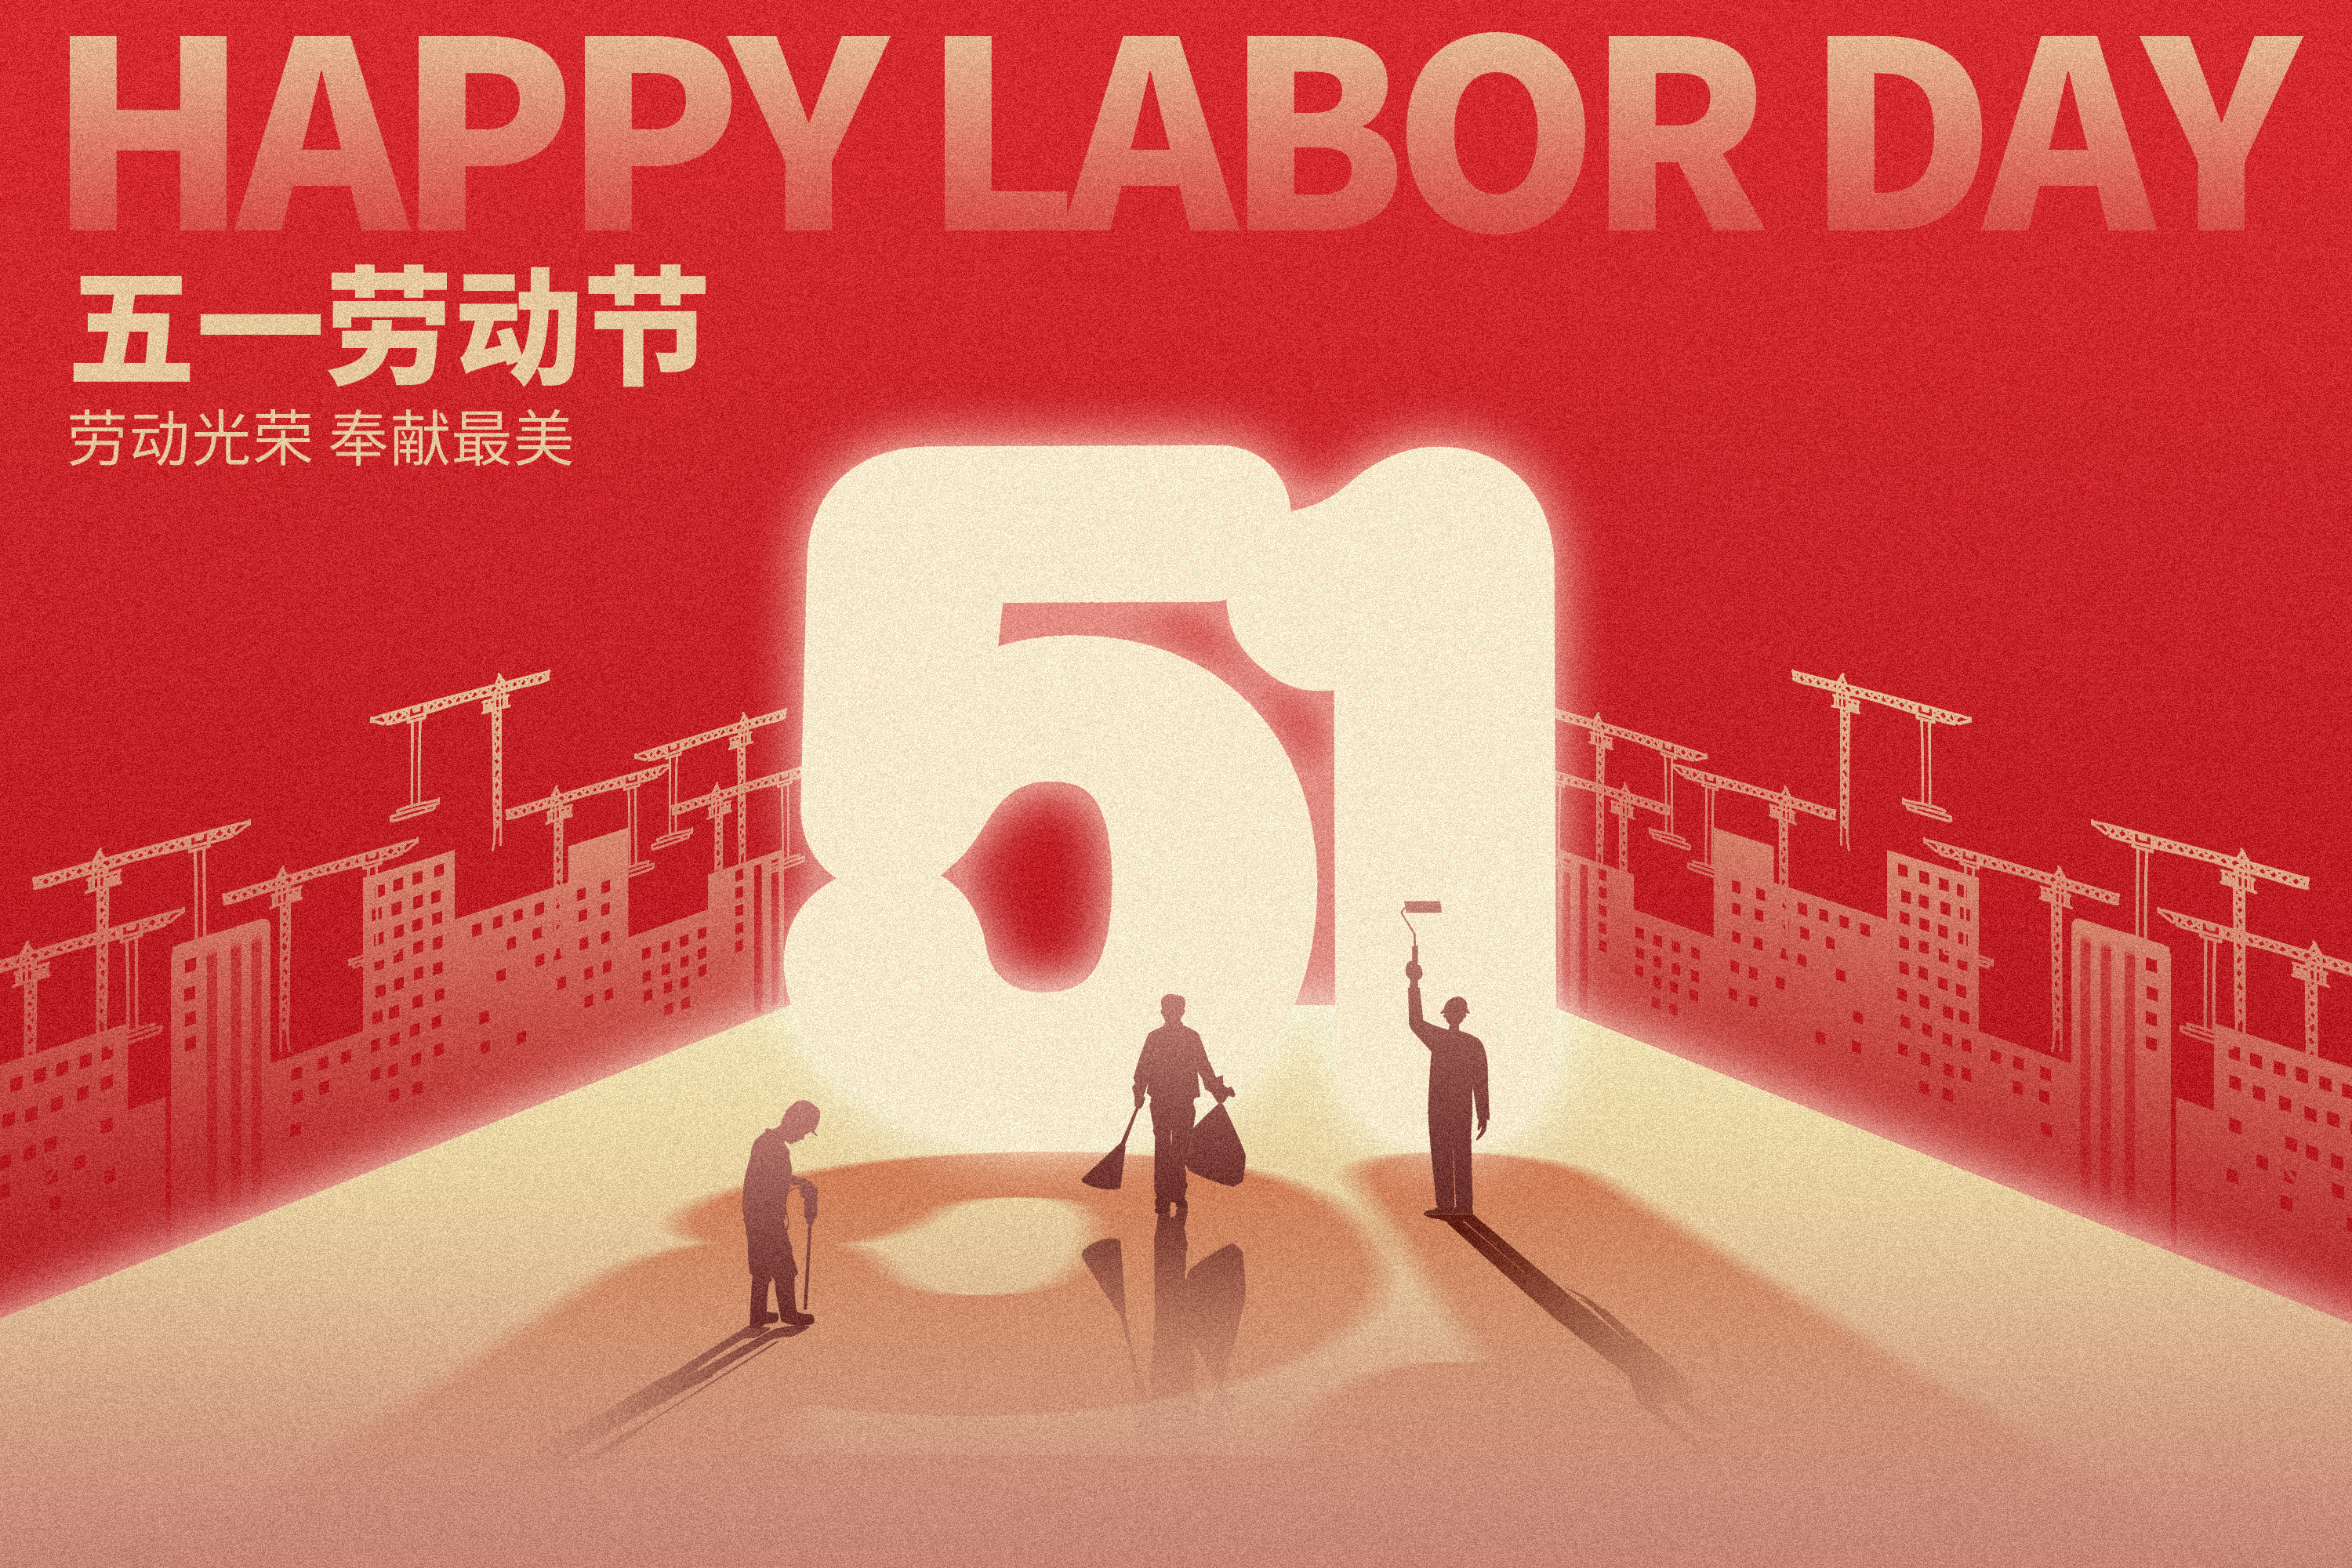 Warmly celebrate the “May Day” International Labor Day